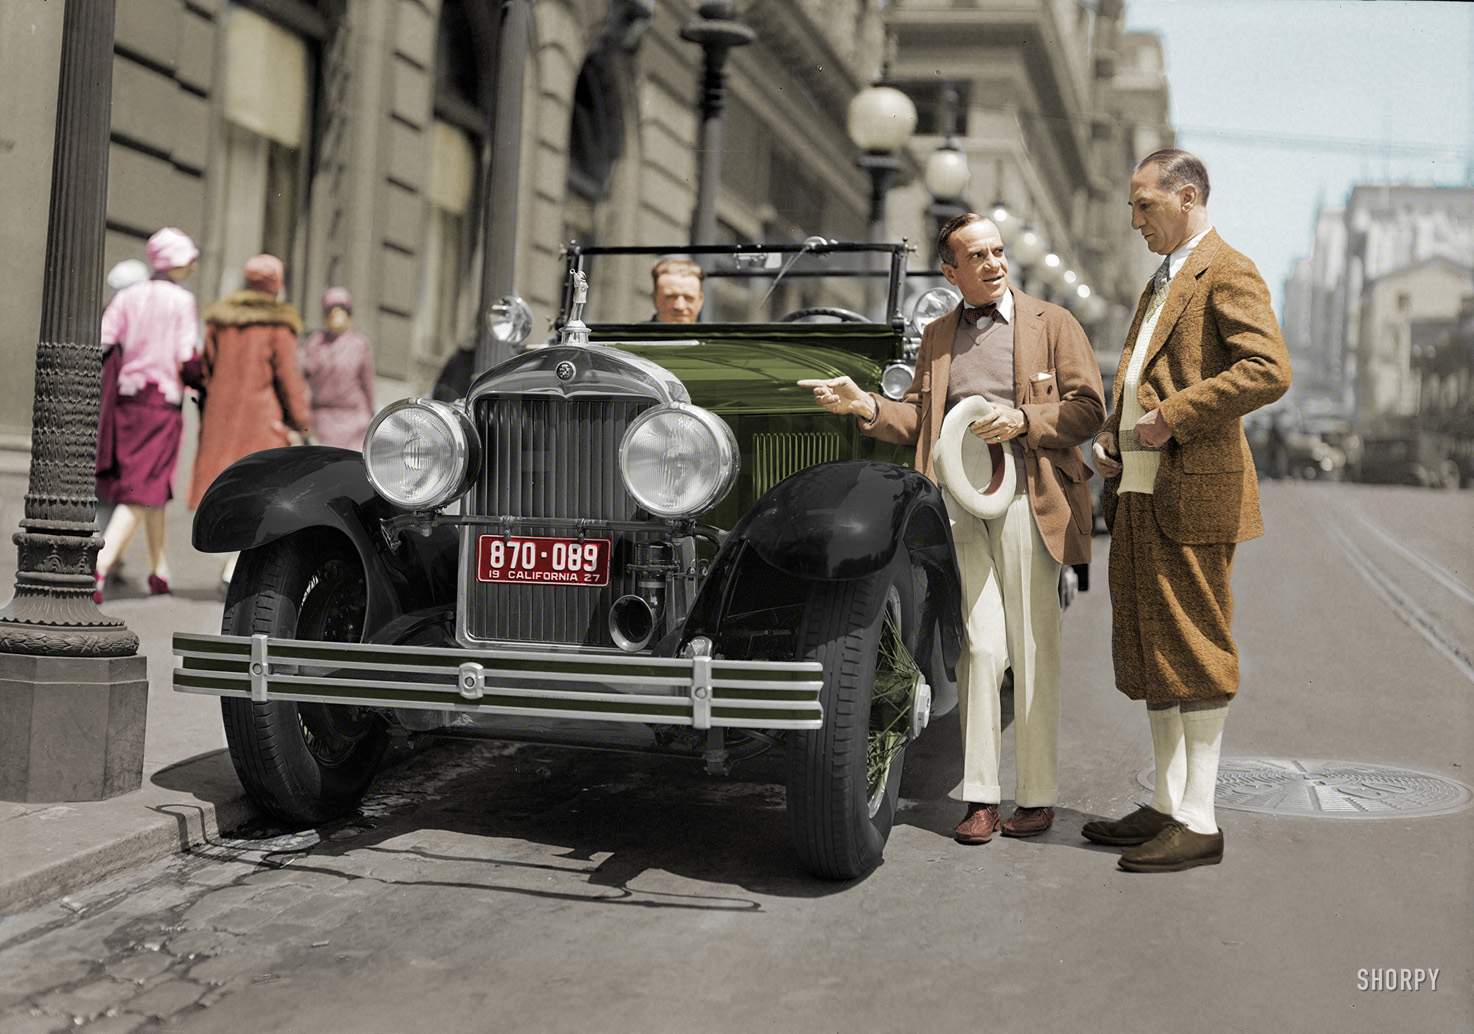 Colorized from this Shorpy original View full size.